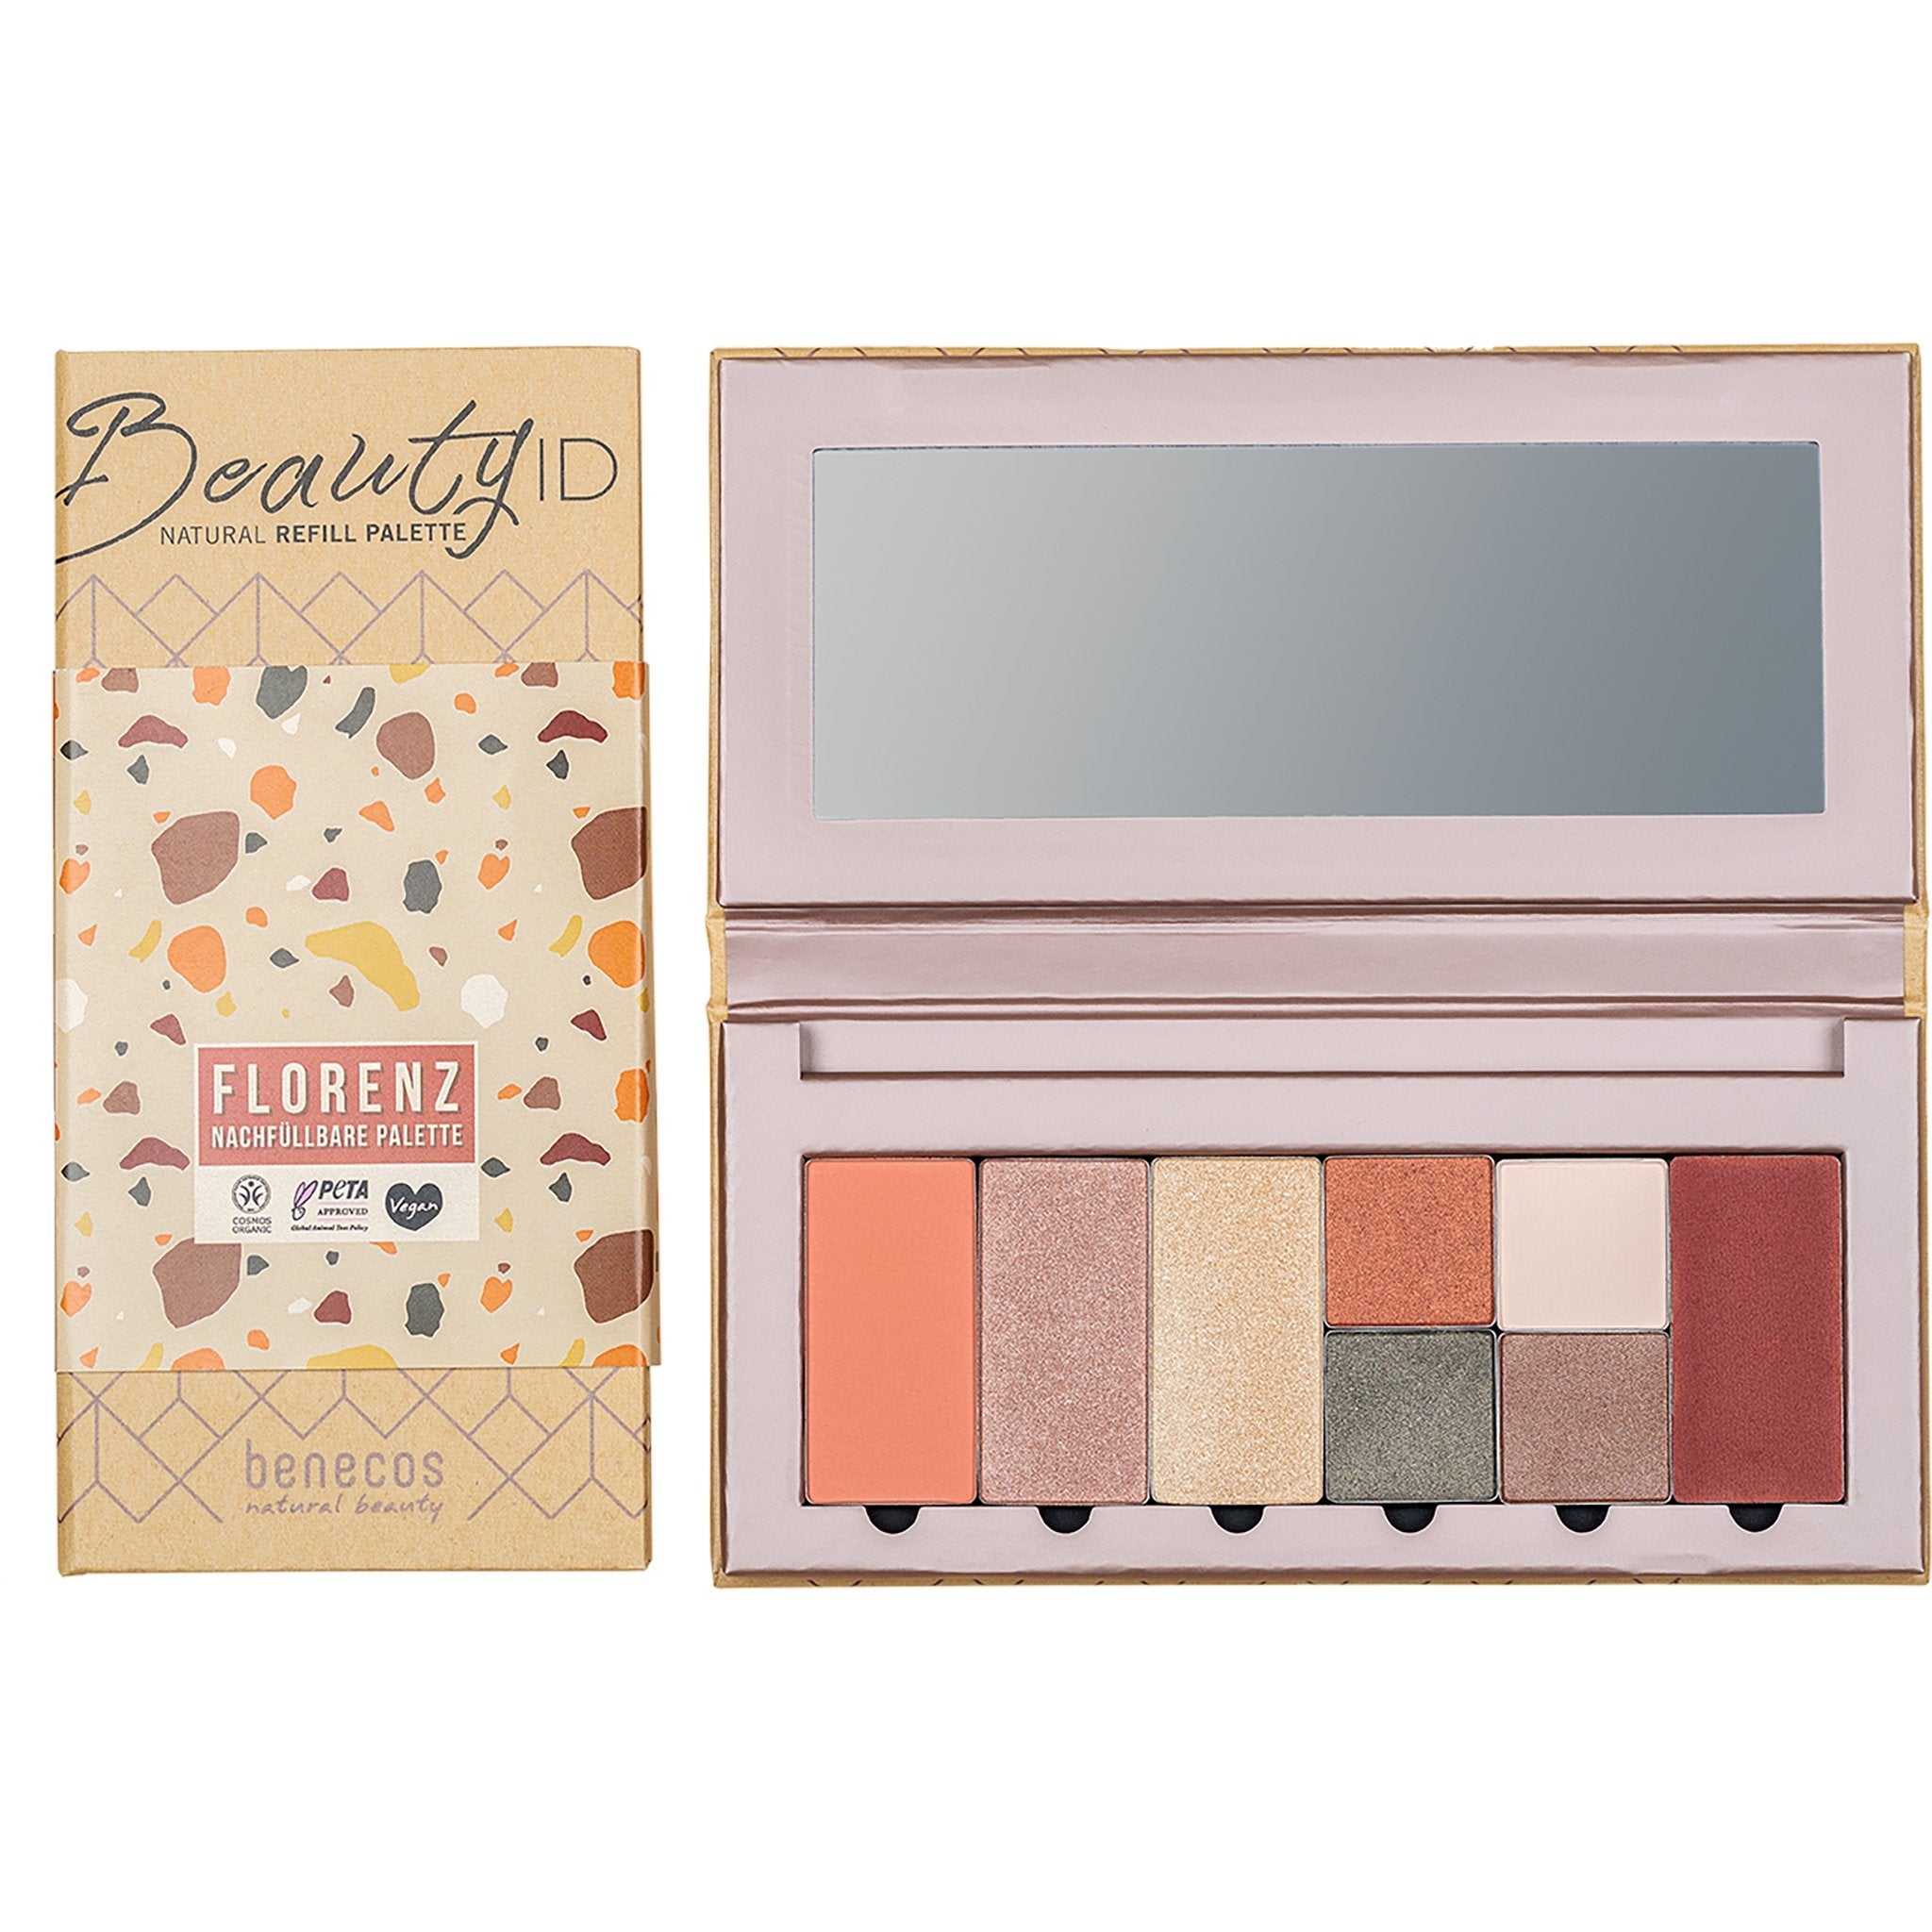 NEW Beauty ID - Florence Palette - mypure.co.uk